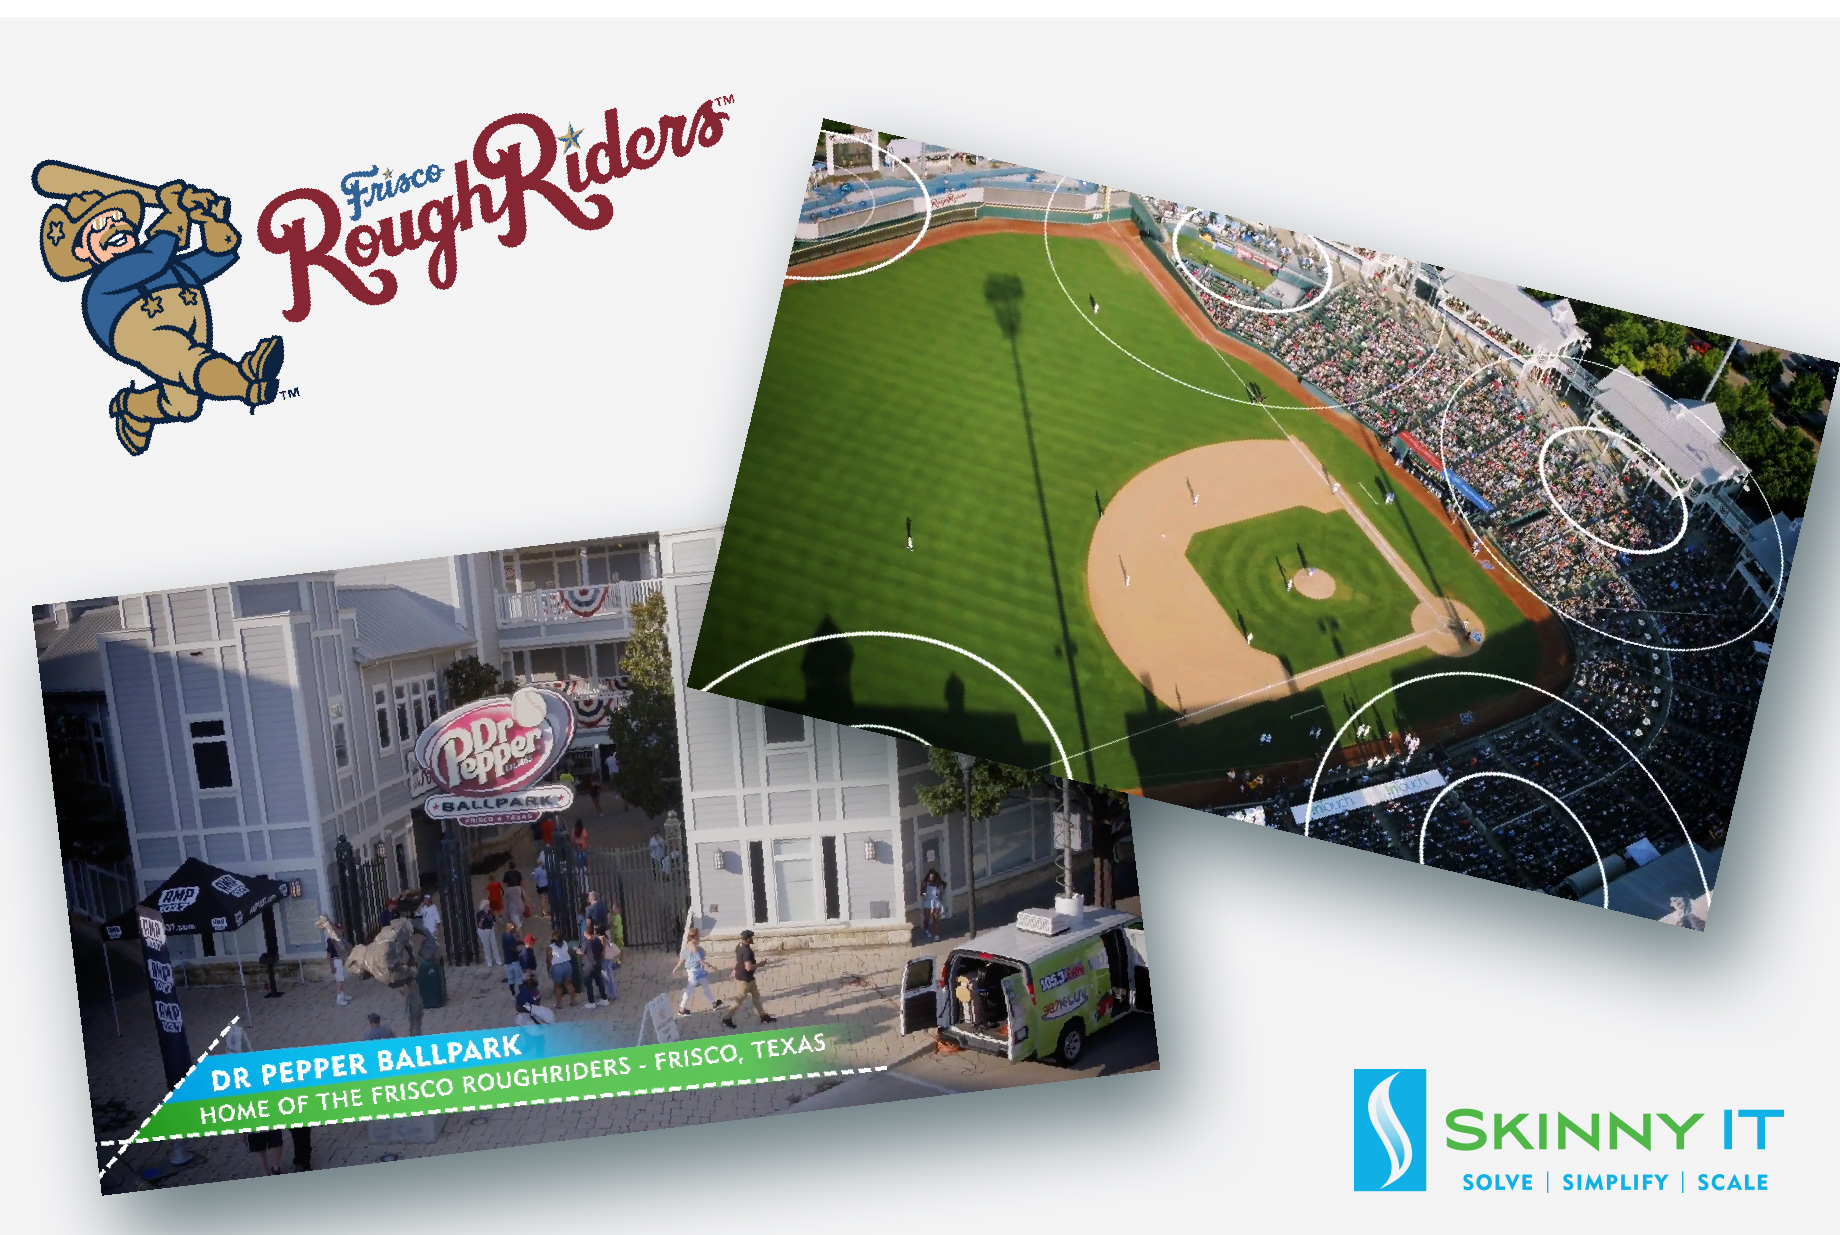 Skinny IT and Frisco RoughRiders